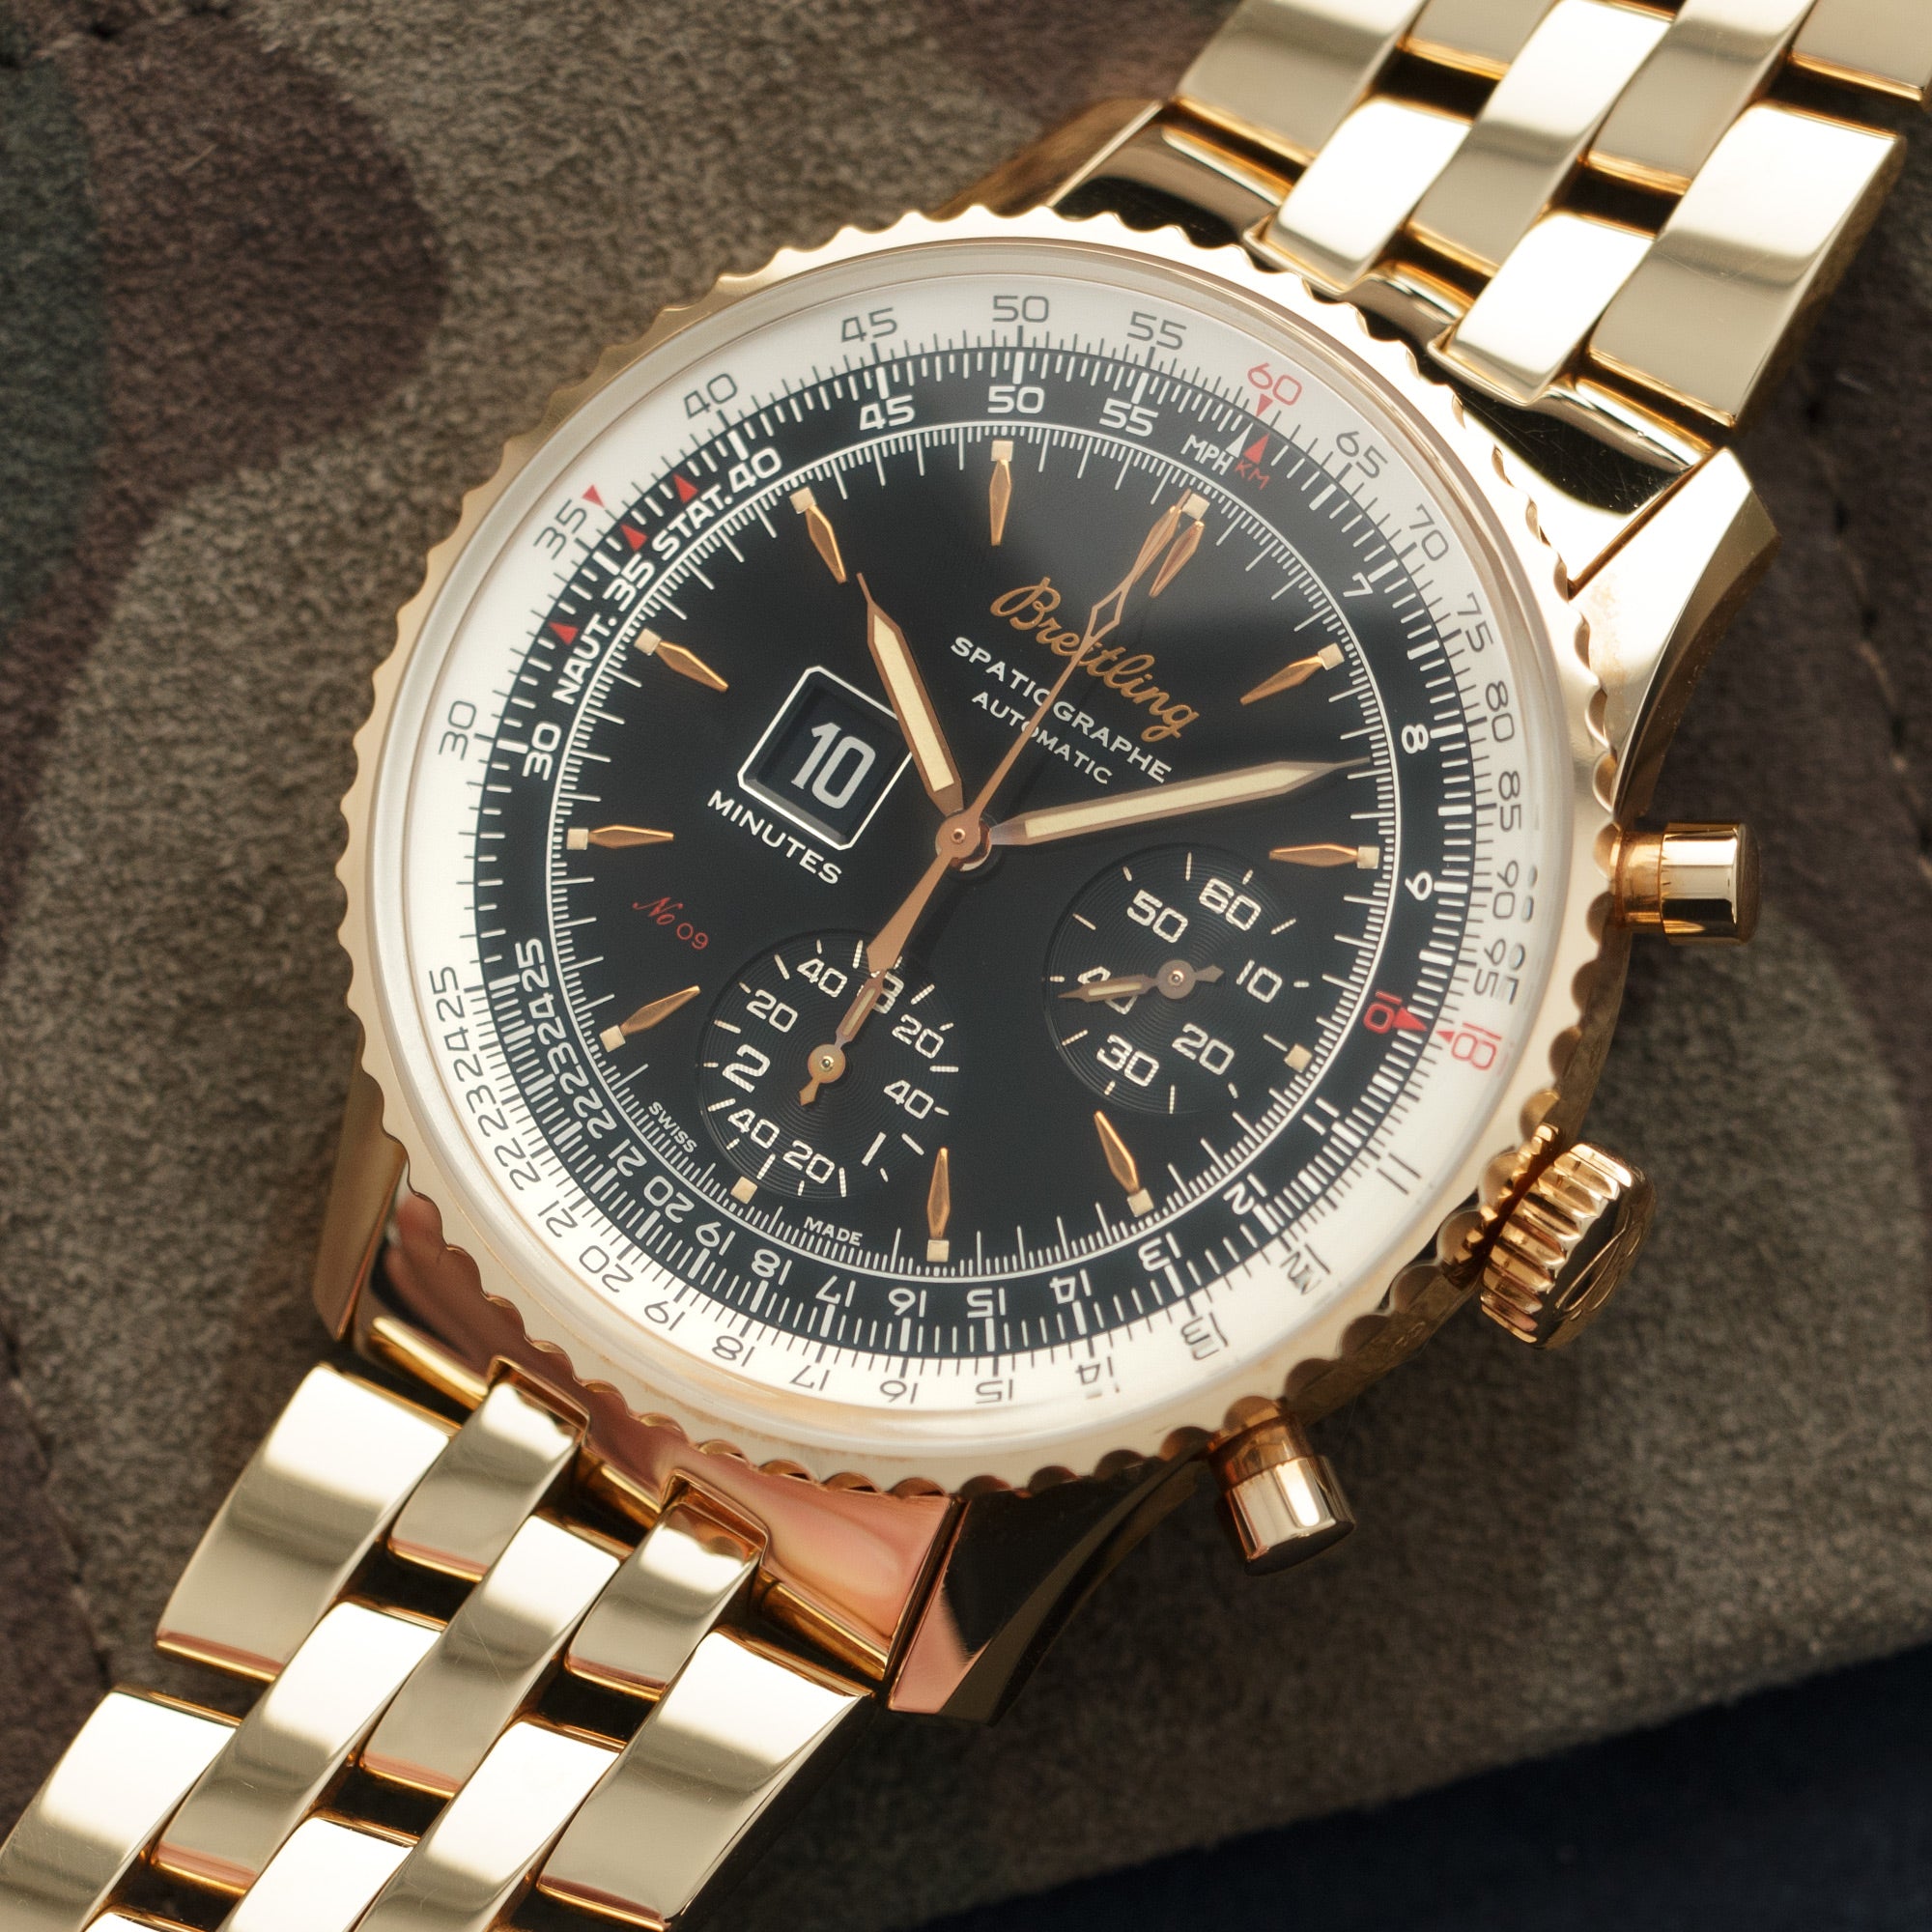 Breitling - Breitling Yellow Gold Montbrilliant Spatiographe Watch - The Keystone Watches